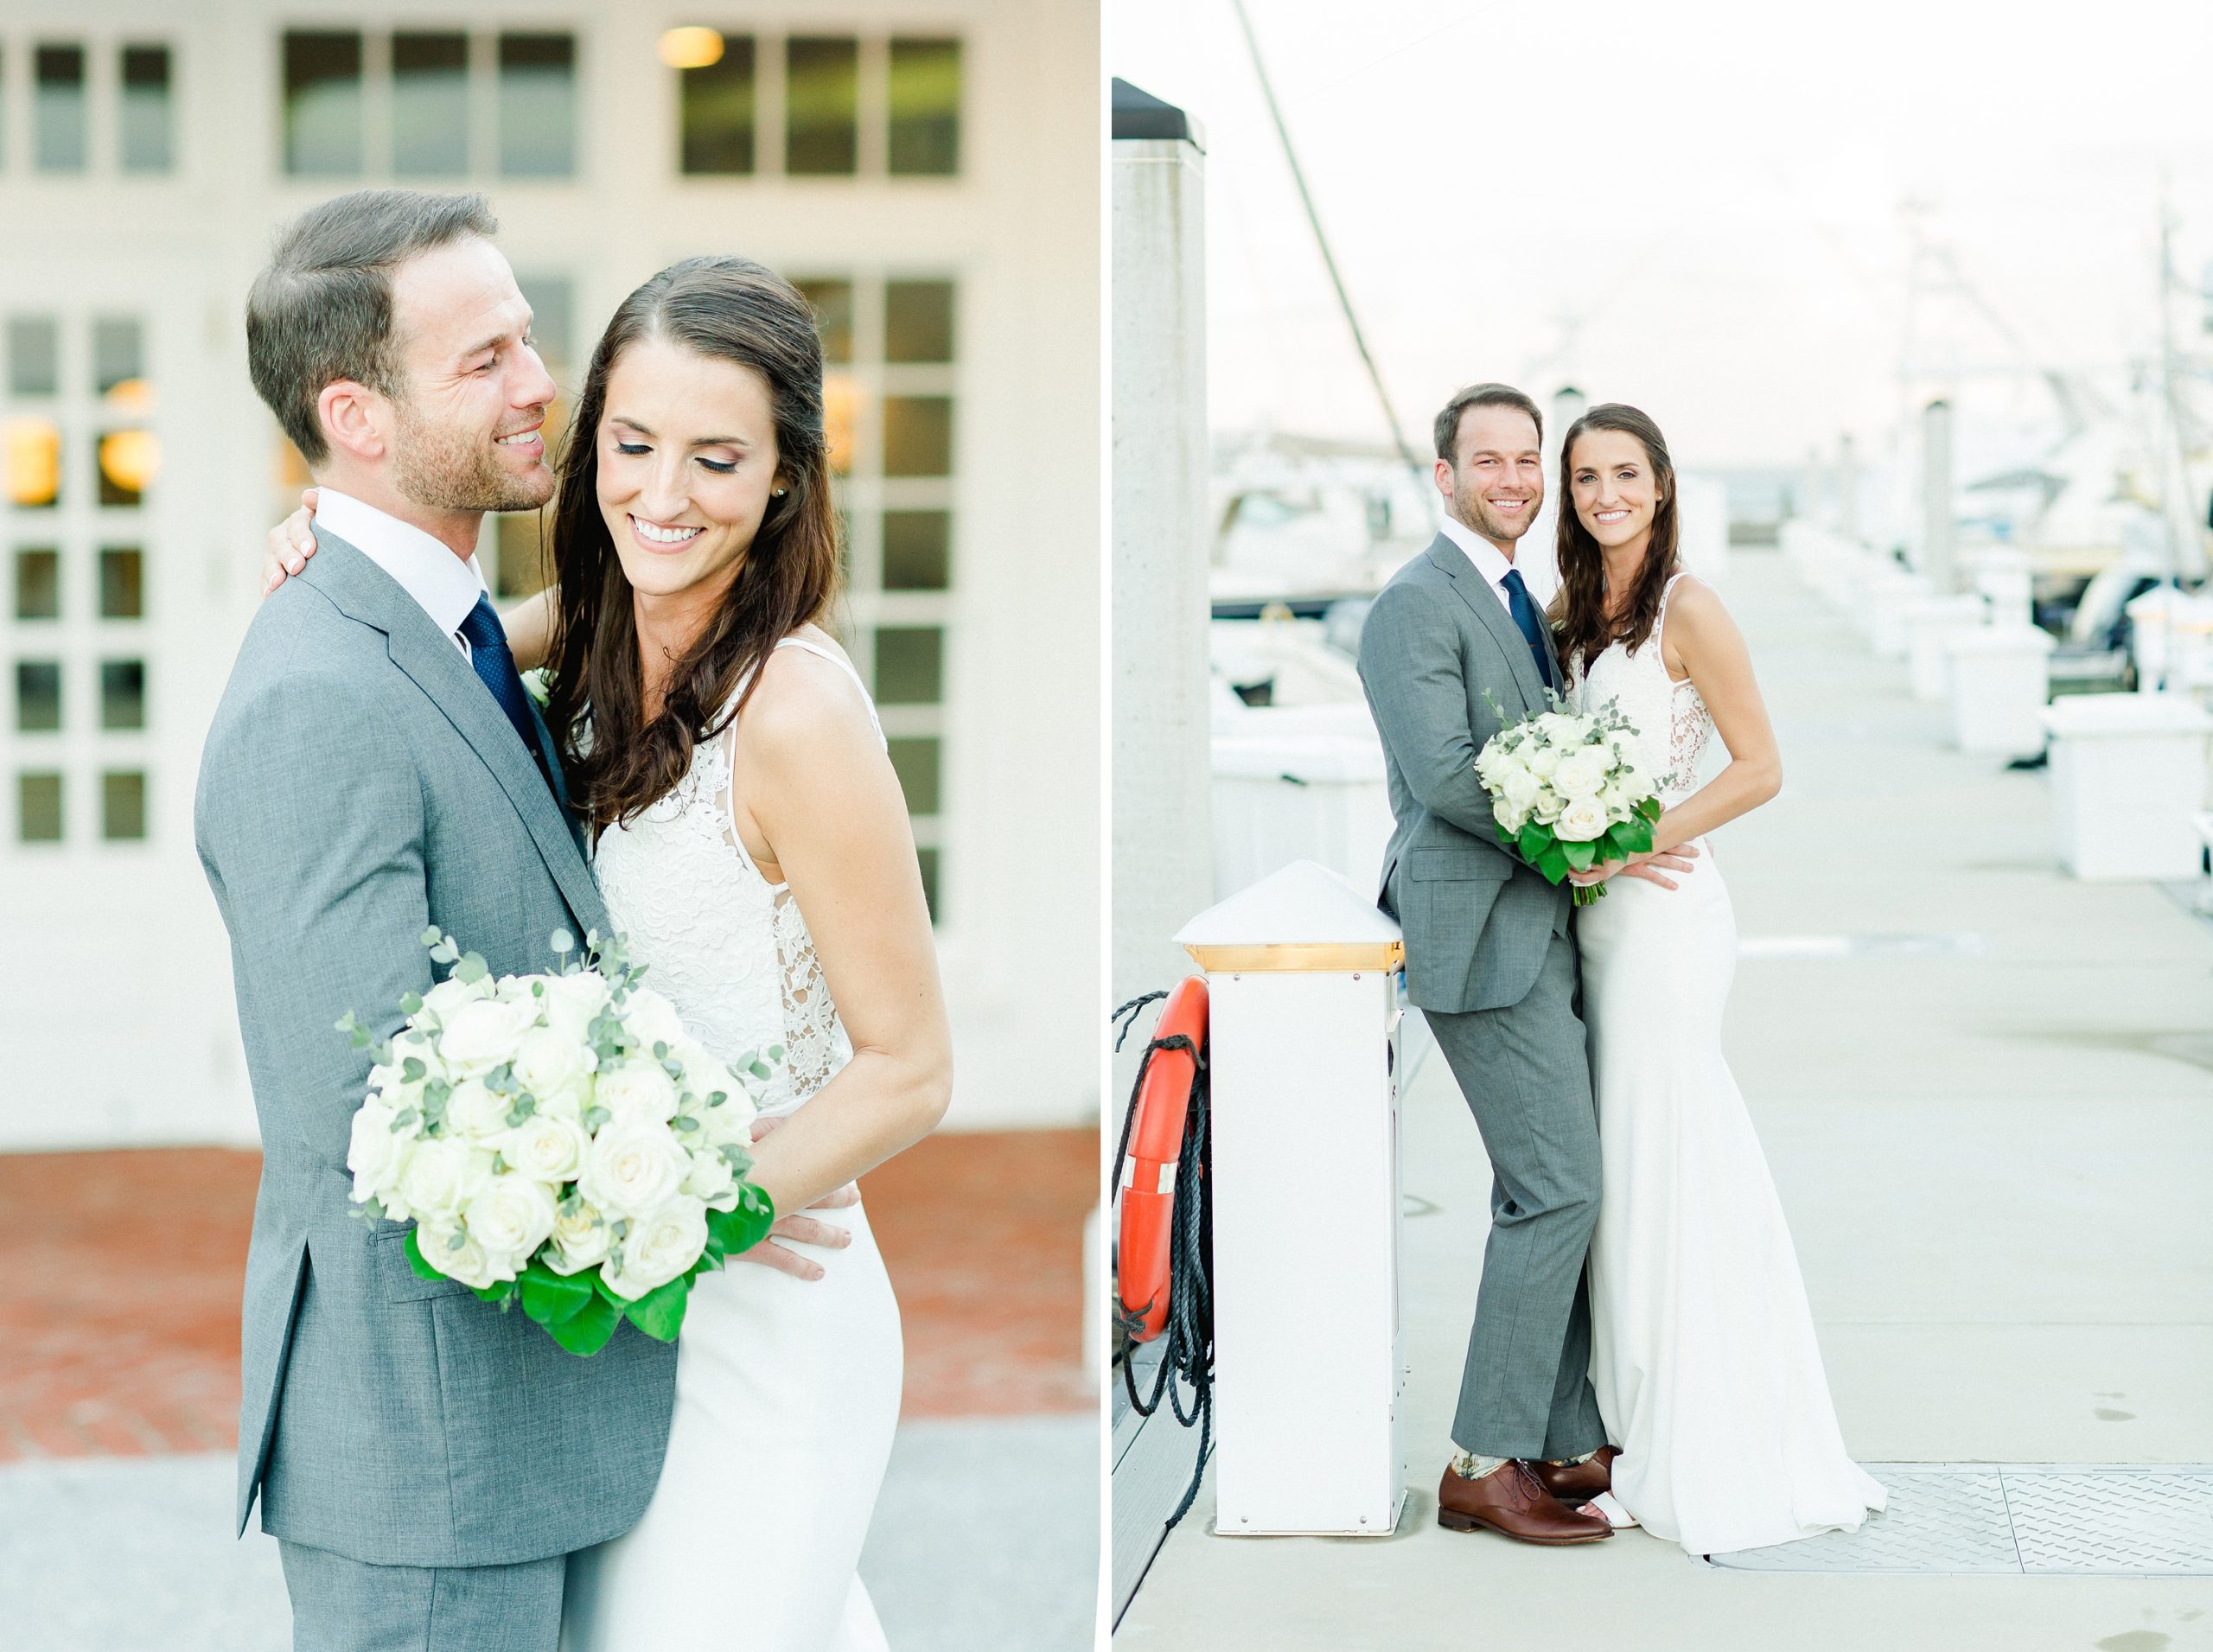 Tampa Yacht Club Wedding Photographer | © Ailyn LaTorre Photography 2019